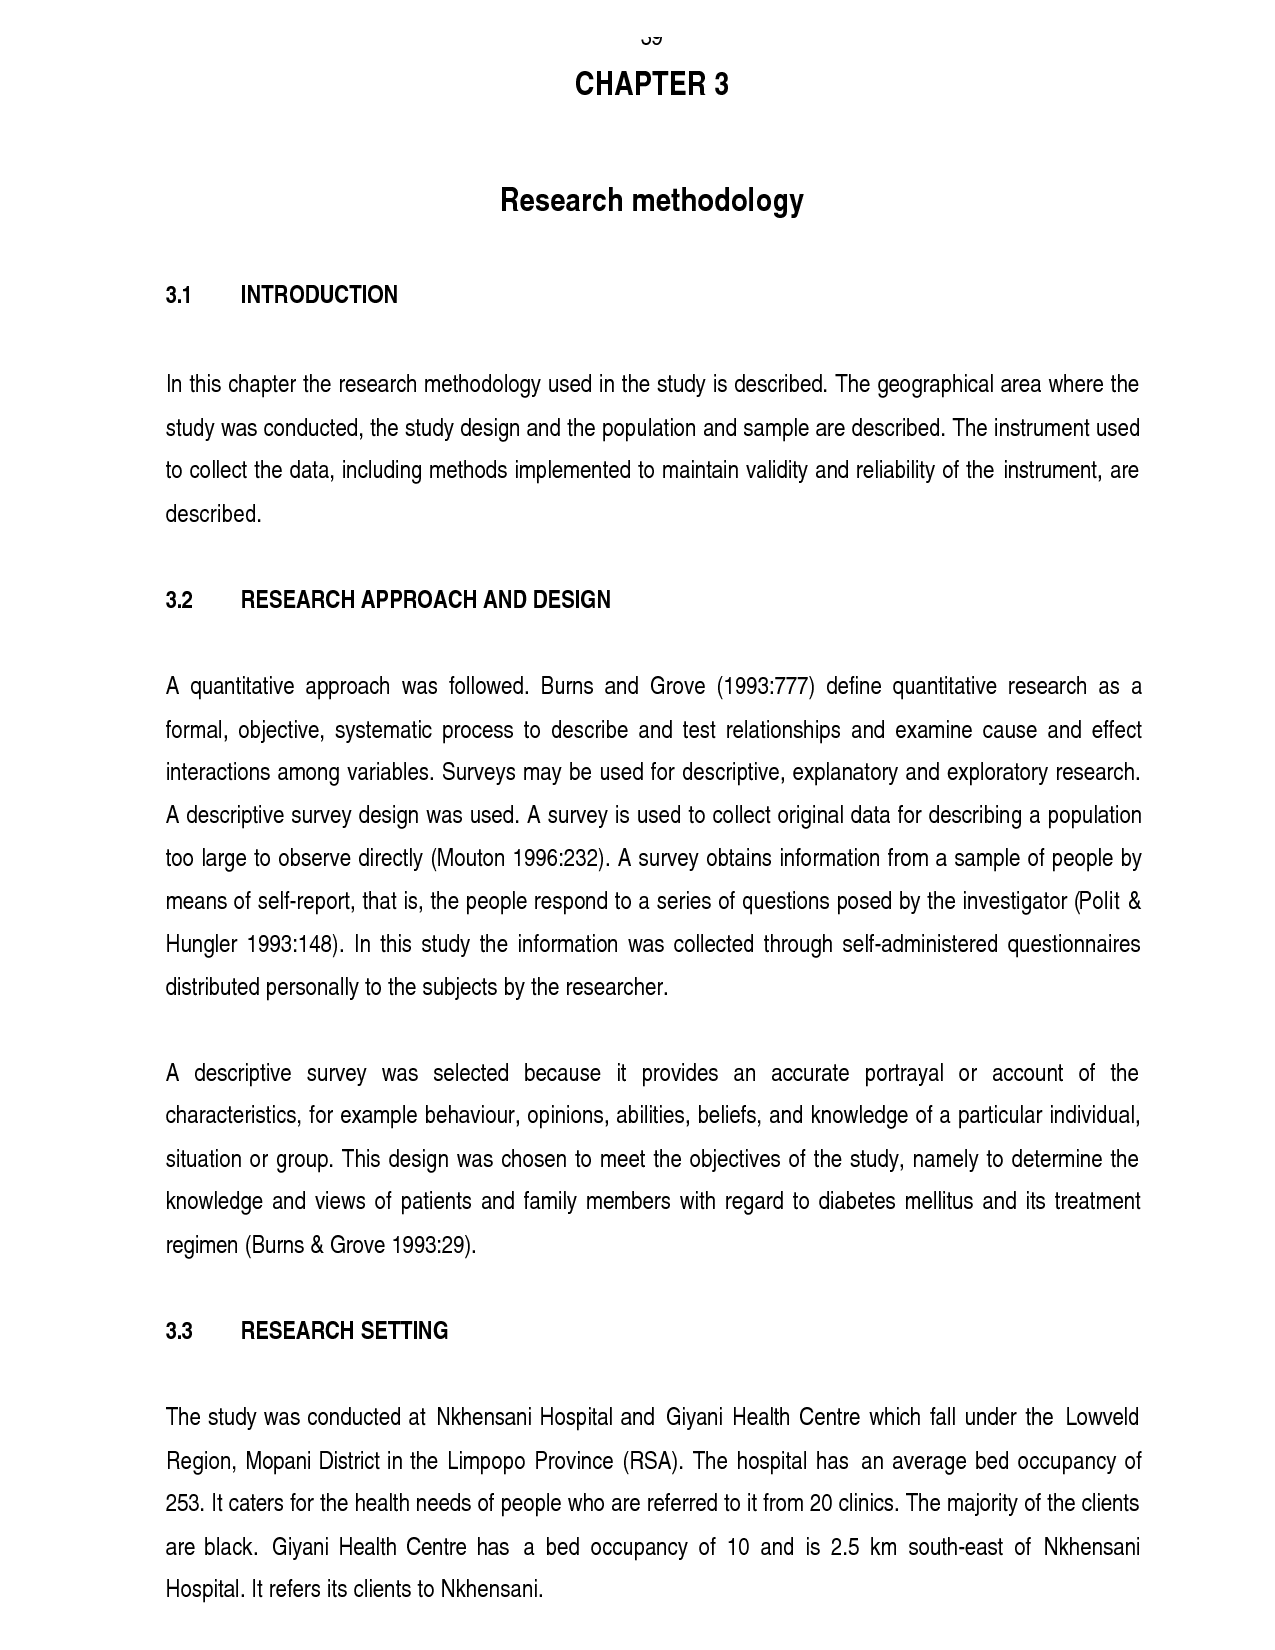 Essay on research methodology